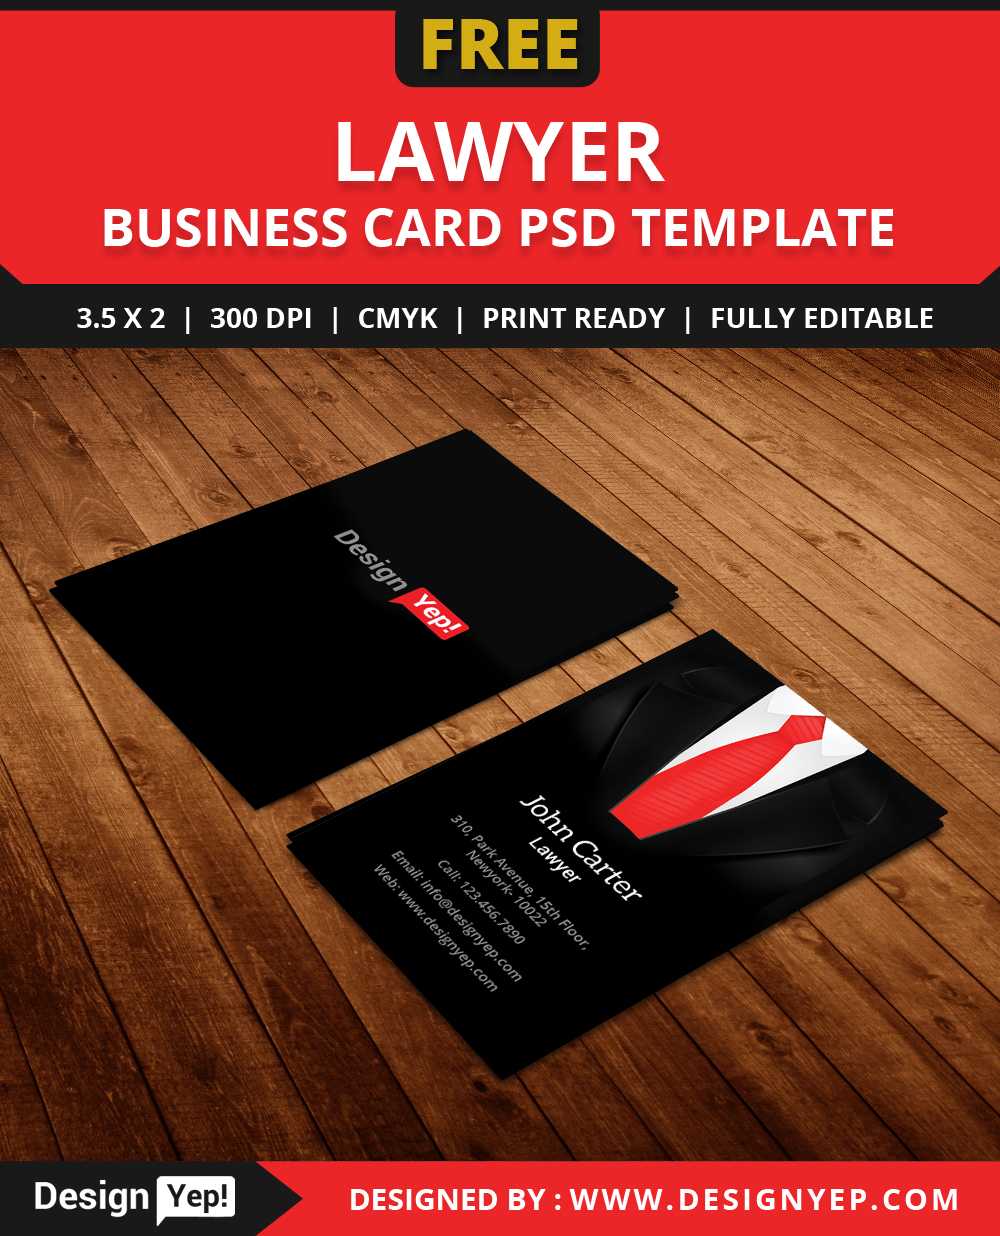 Free Lawyer Business Card Template Psd – Designyep With Legal Business Cards Templates Free